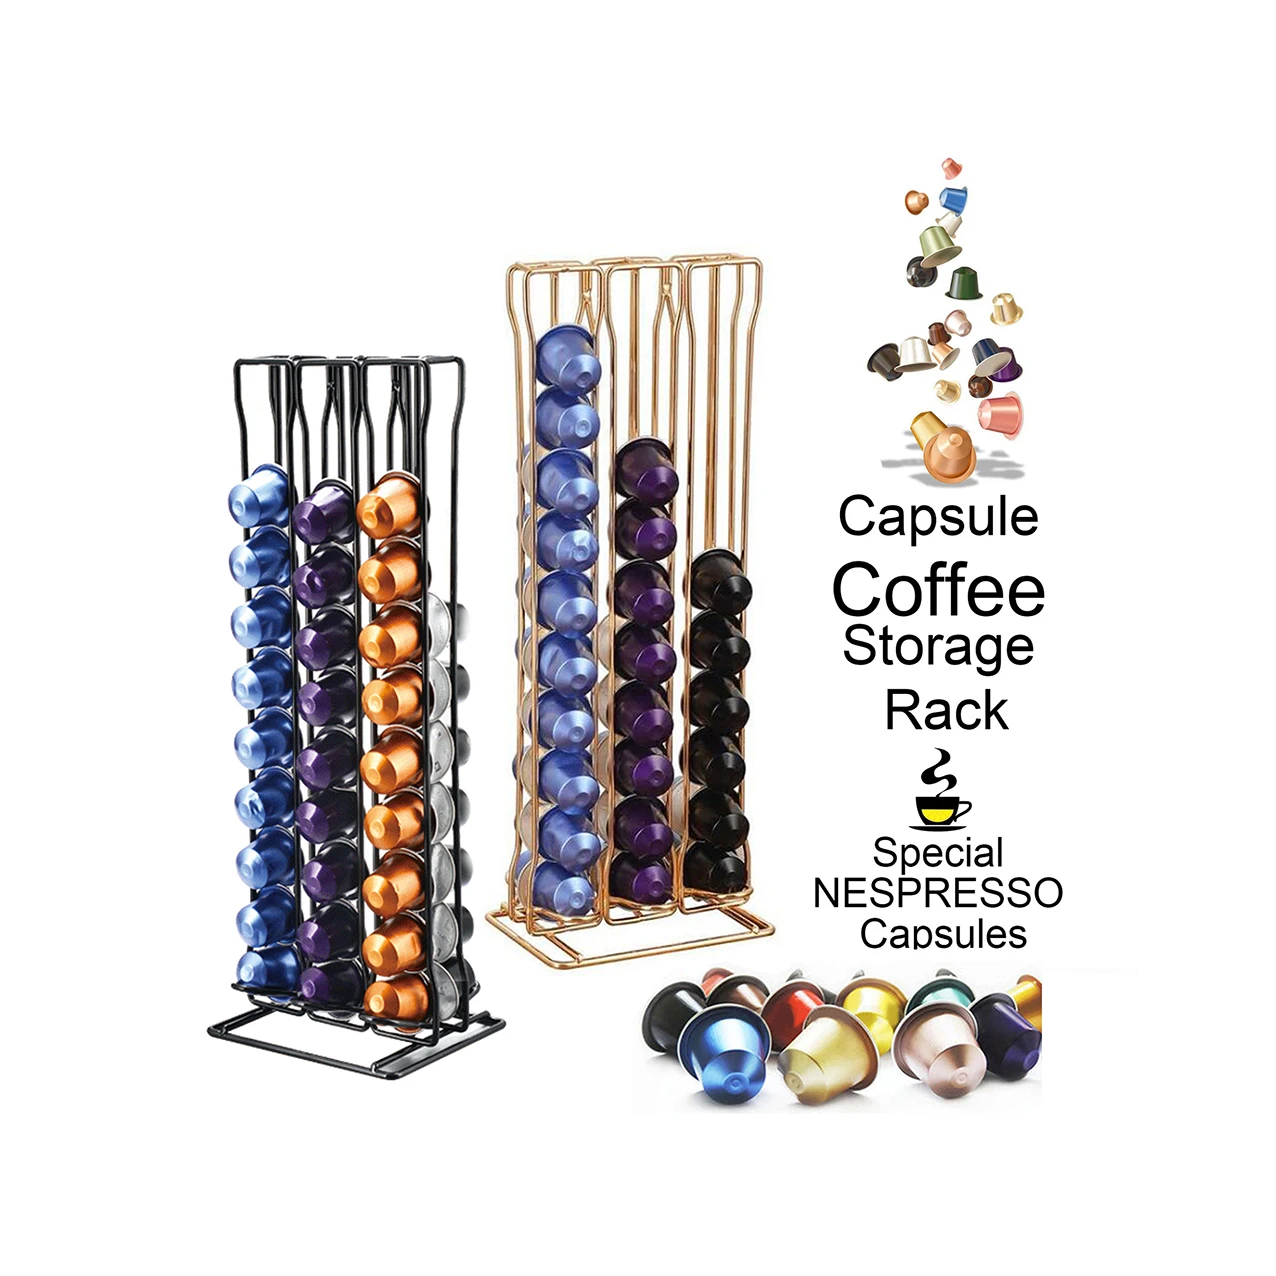 

Rack Rotatable Coffee Pod Holder Stand Storage Shelves For 60pcs Dolce Gusto Nespresso Capsule Holder Coffee, Black / gold